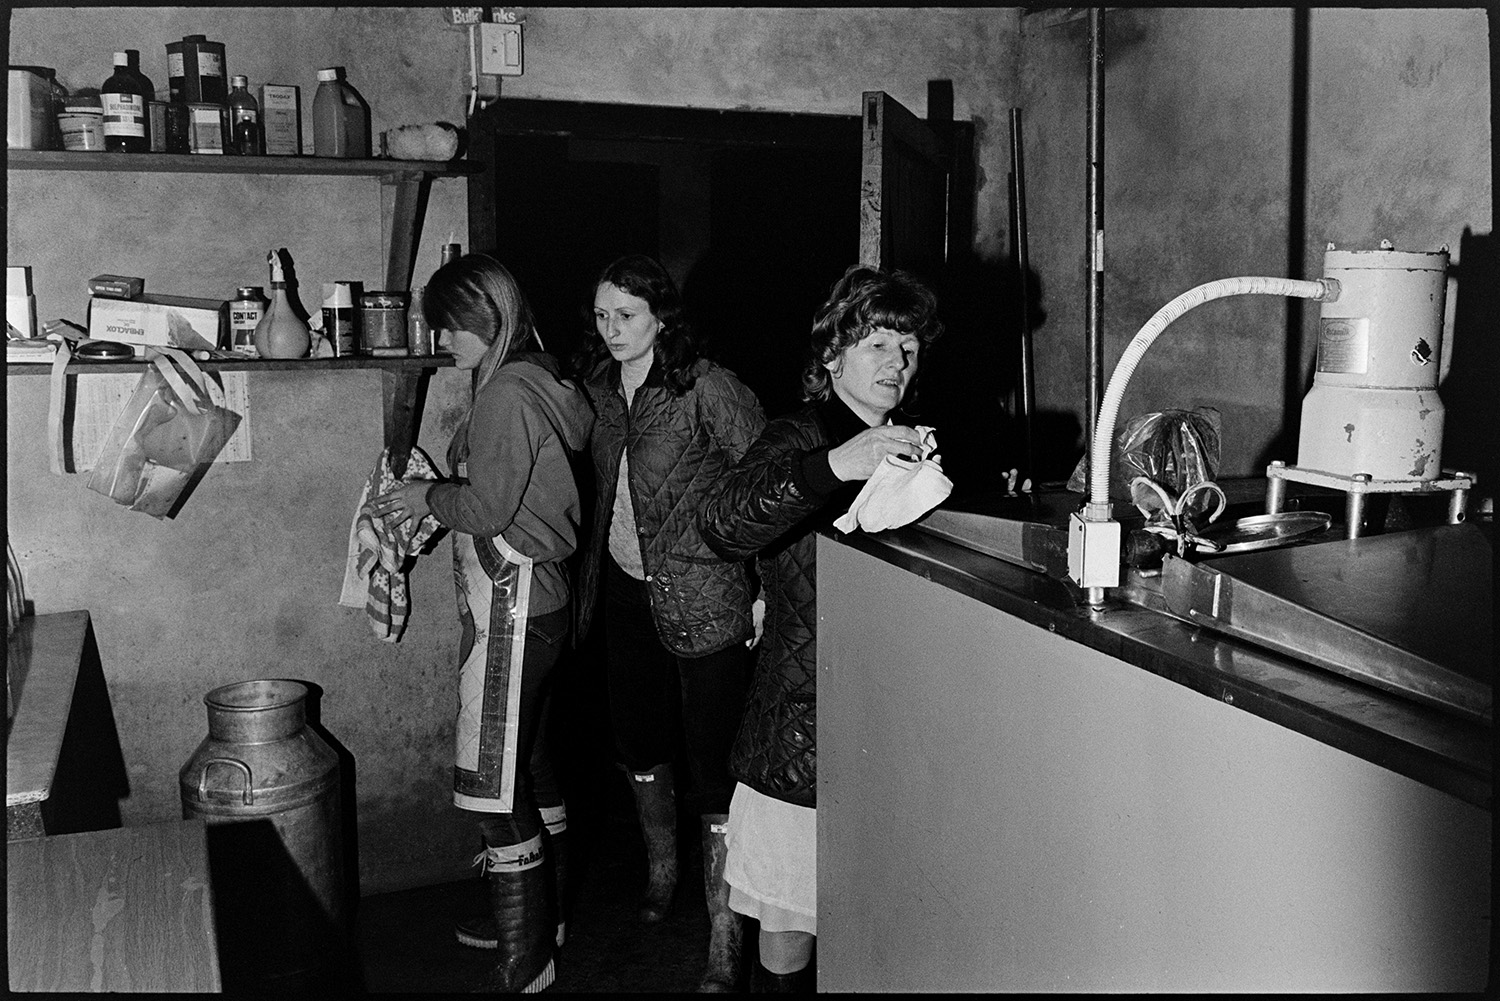 Women in dairy filling milk bottles, early morning.
[Three women, one of which is possibly Marylyn Bourne, working in the dairy at Jeffrys Farm, Beaford in the early morning. The farm was also known as Mill Road Farm. A milk churn and various bottles are visible in the dairy.]